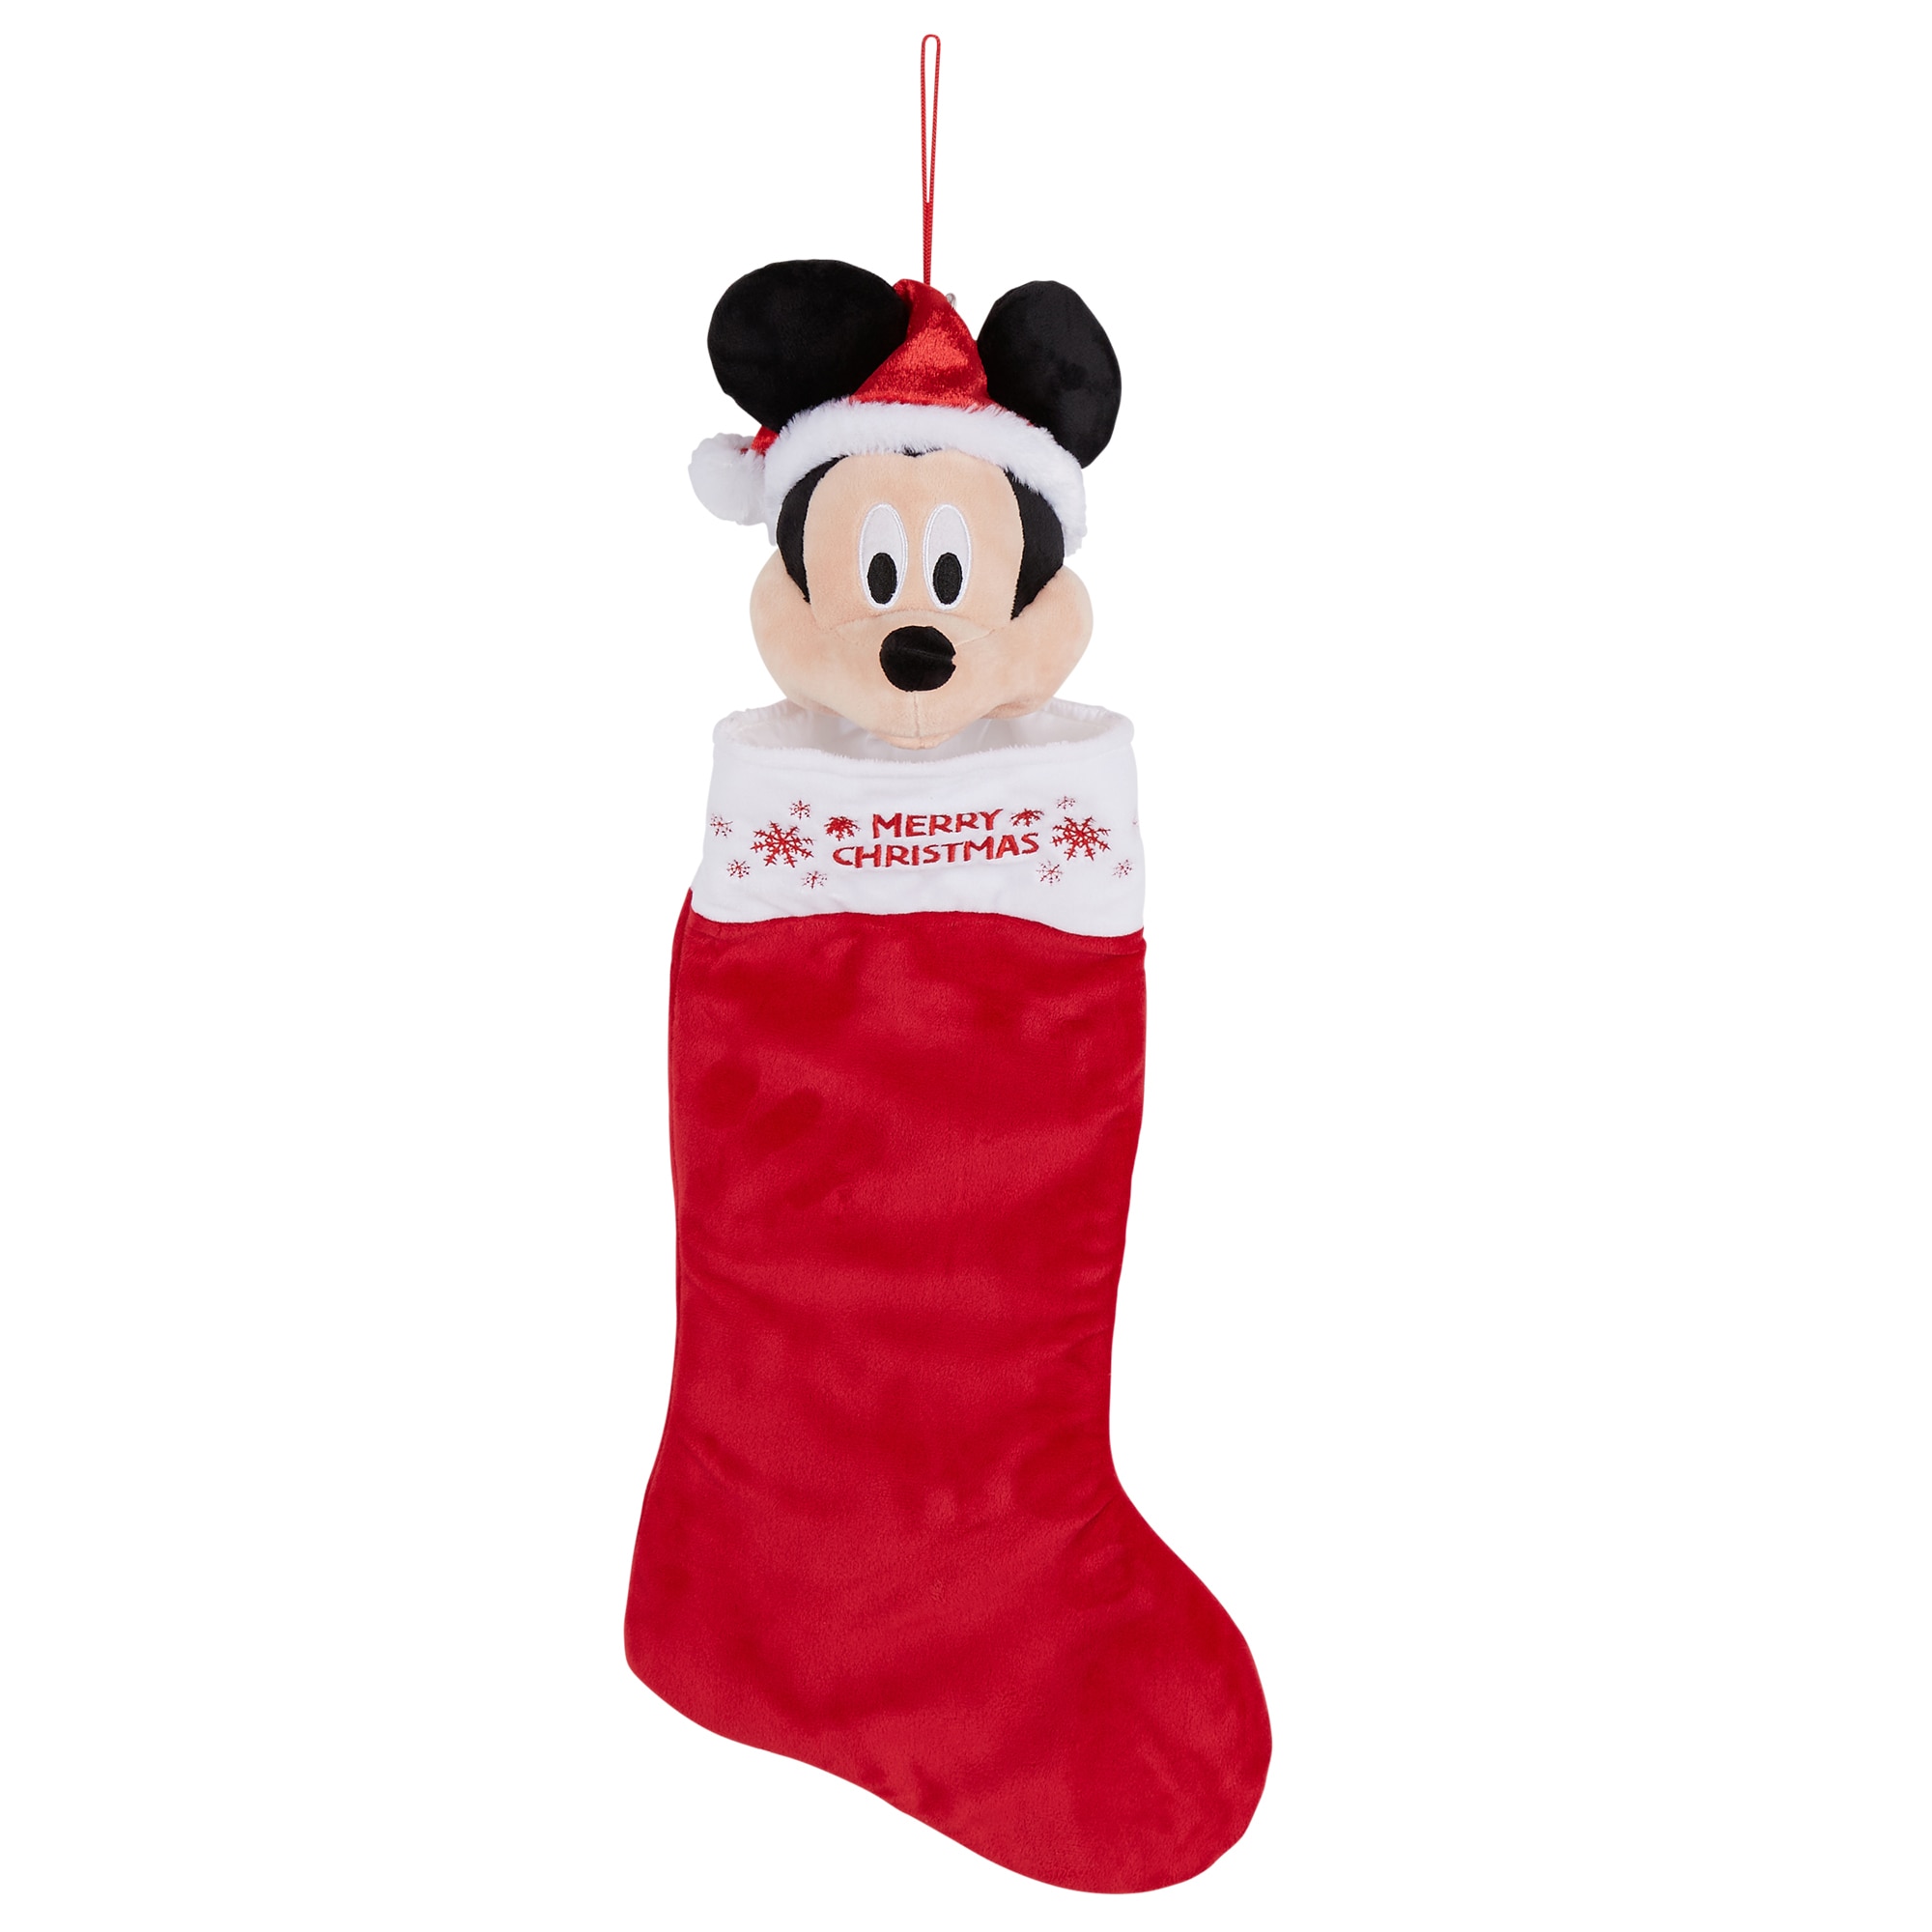 A Disney Christmas Stocking That Gives and Receives